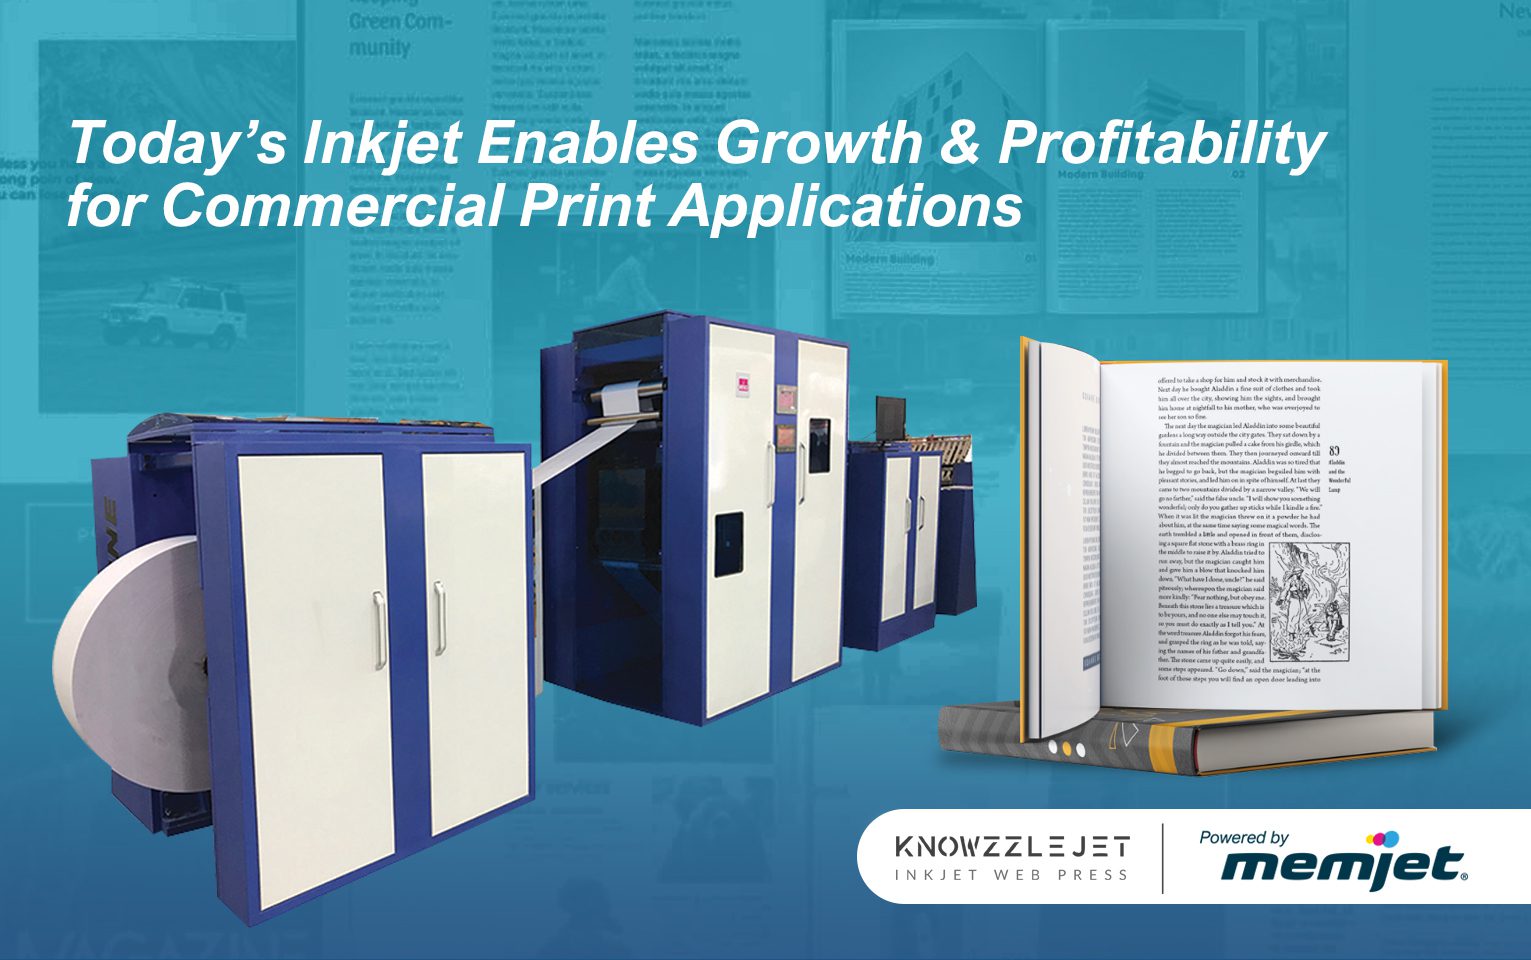 Today’s Inkjet Enables Growth & Profitability for Commercial Print Applications